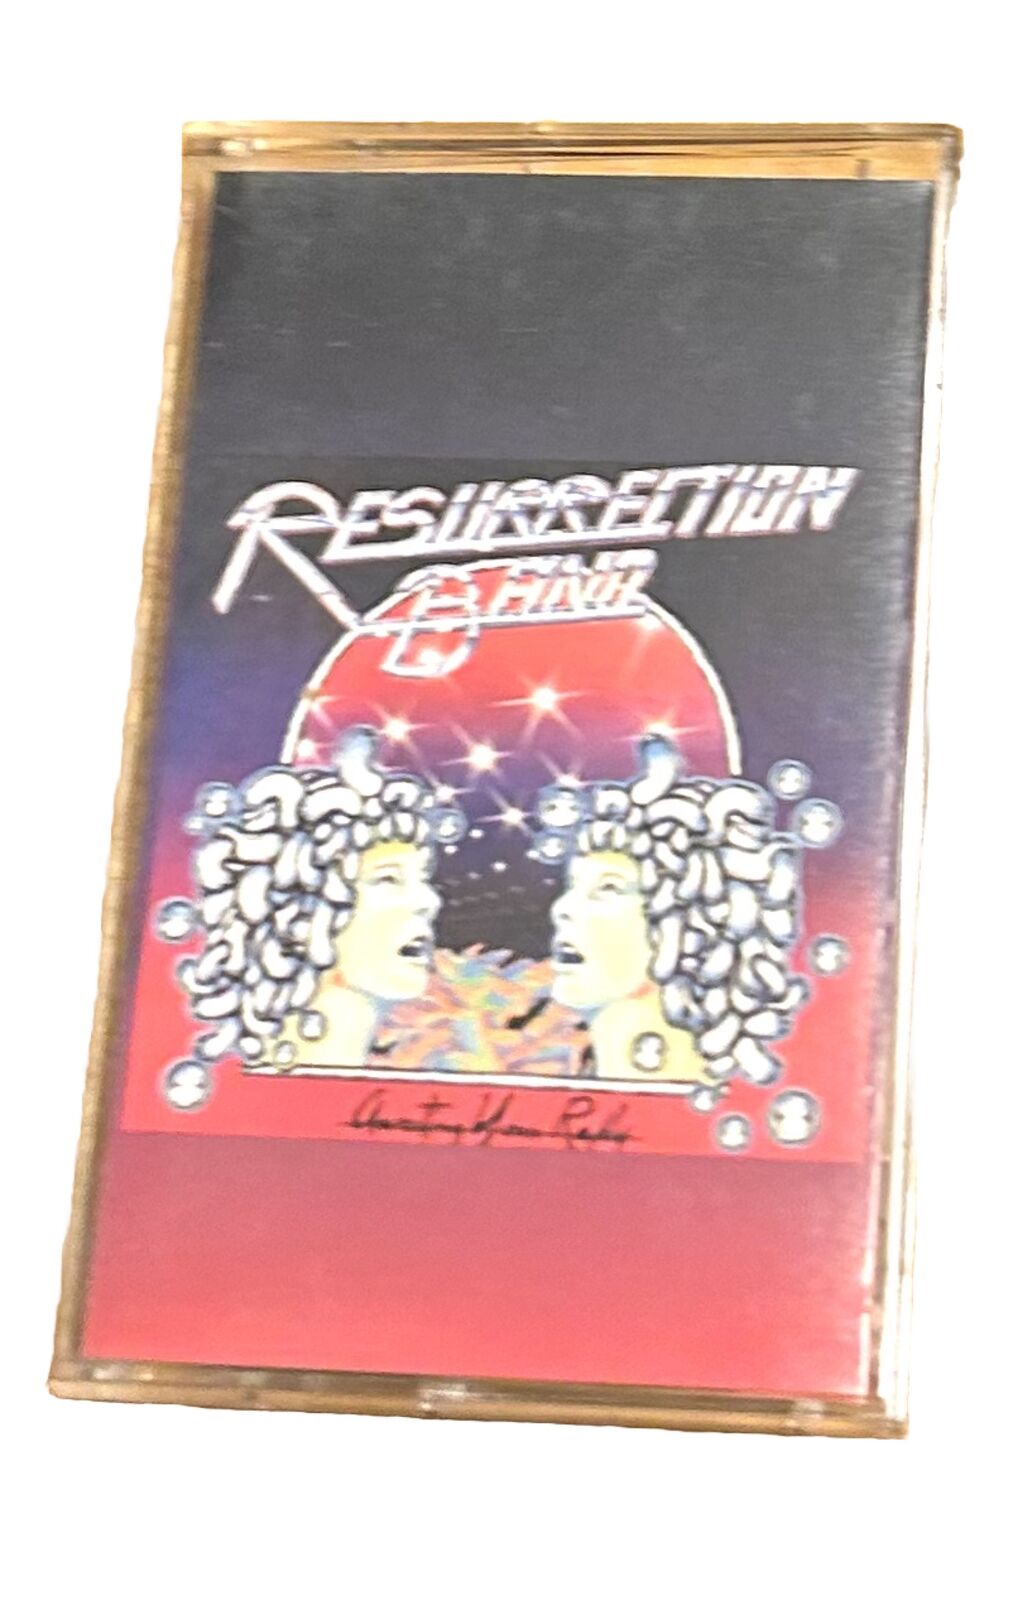 Awaiting Your Reply Resurrection Band 1974 Rare Vintage Cassette